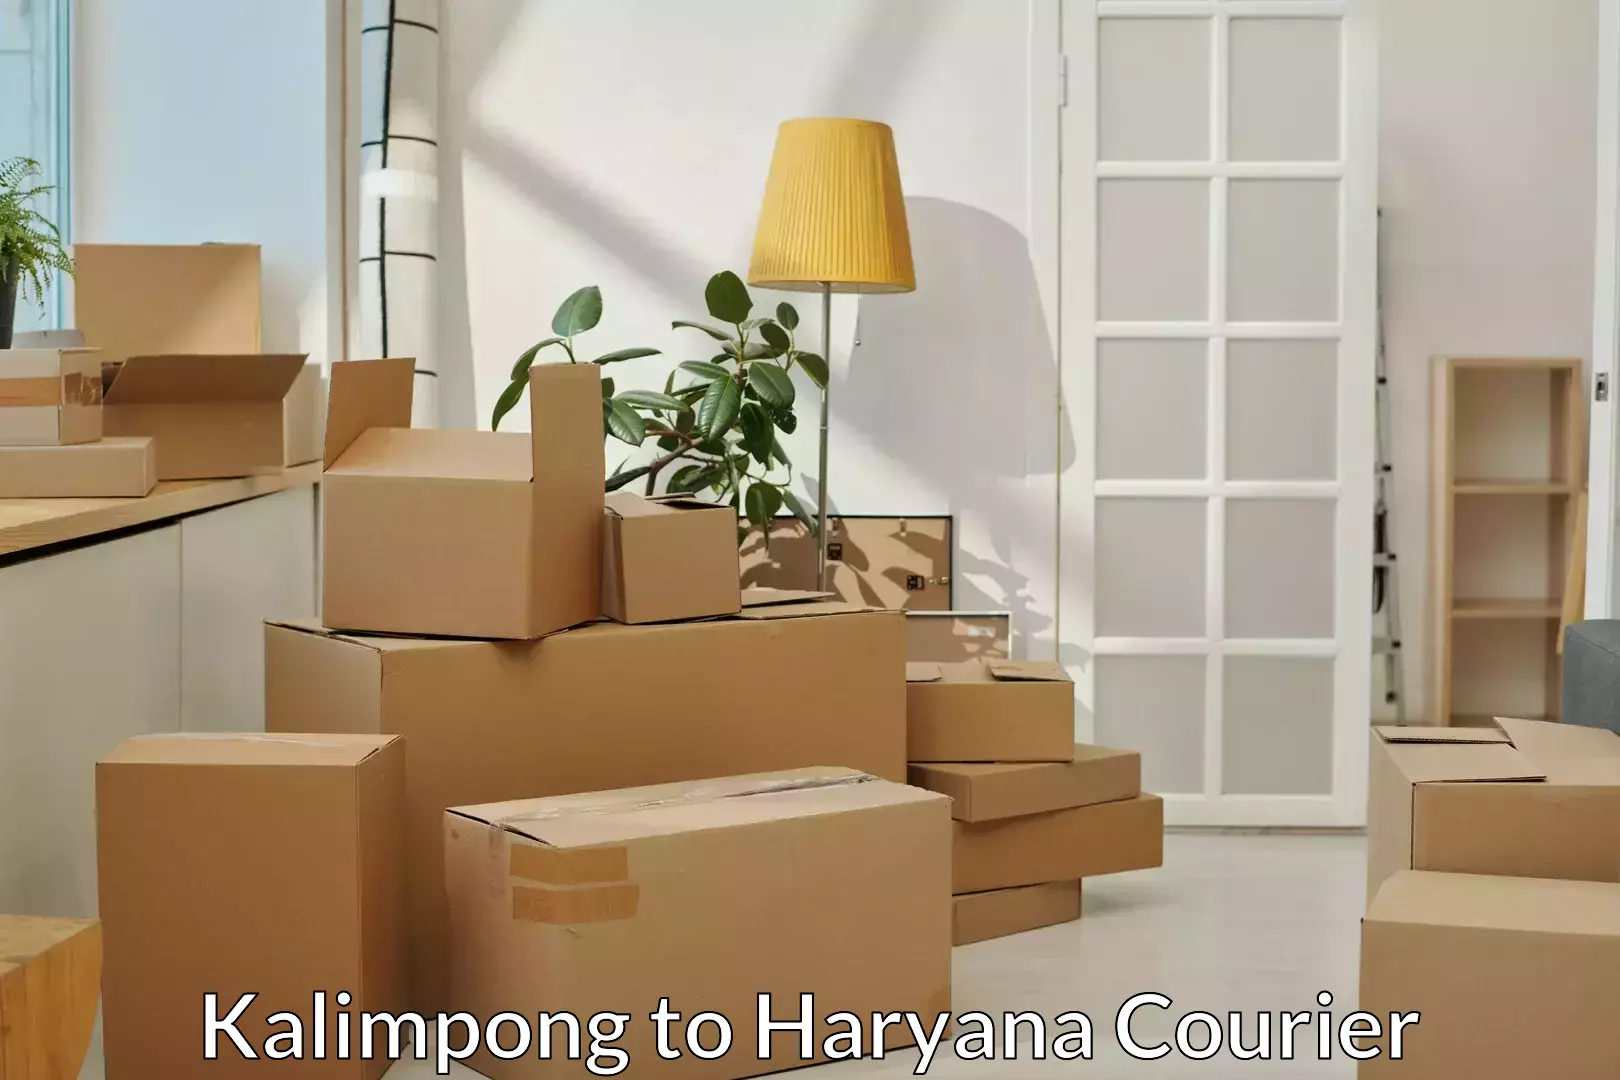 Furniture transport specialists Kalimpong to Panipat